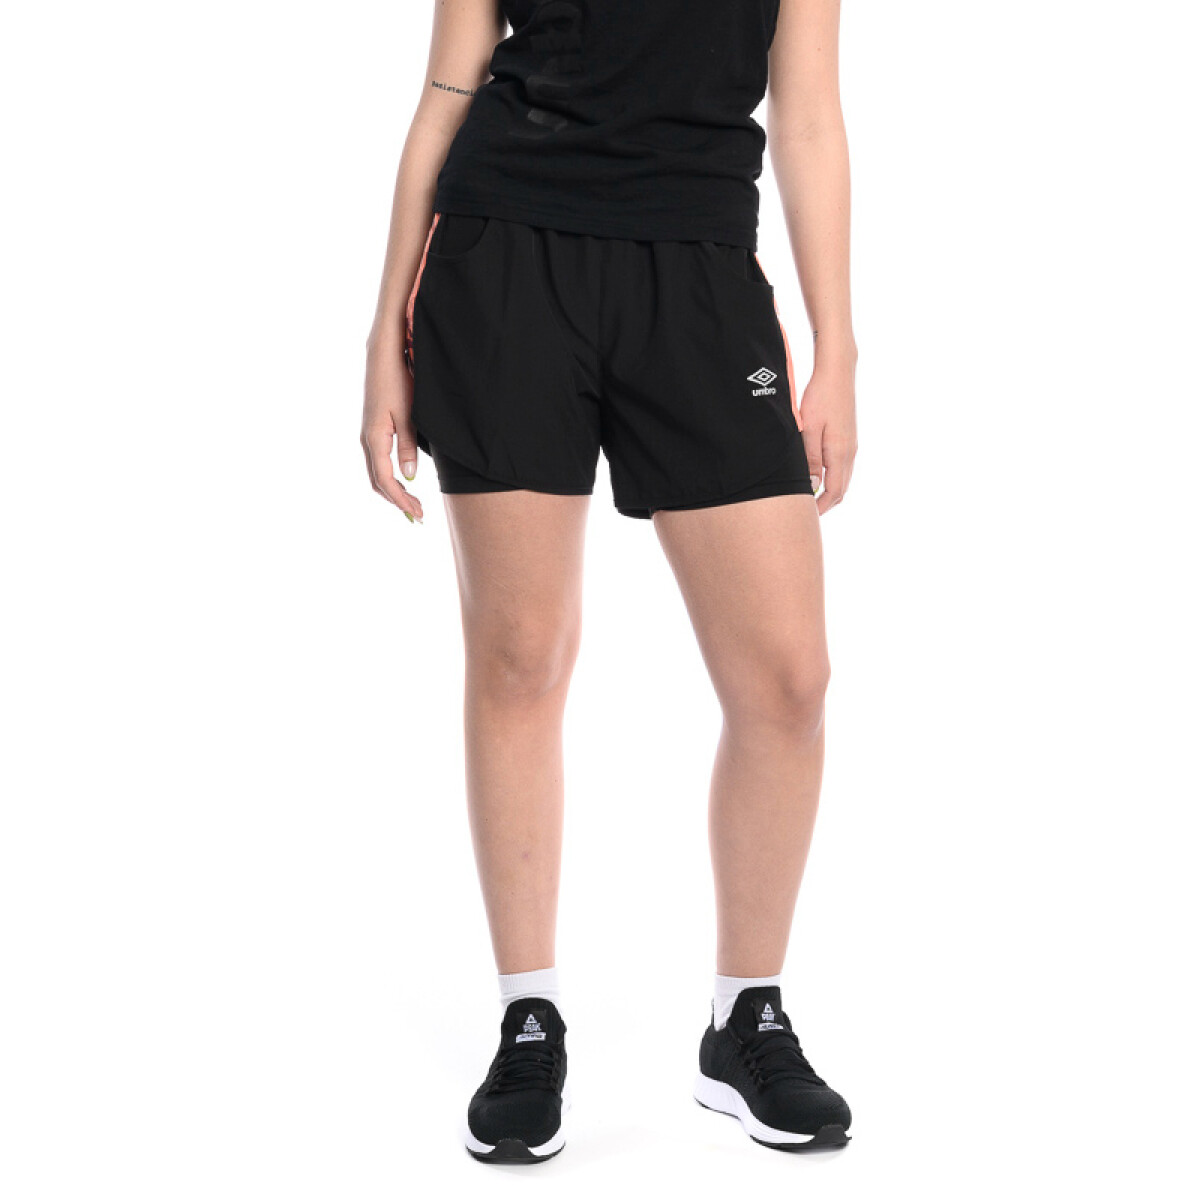 Short Active Umbro Mujer - 2cr 